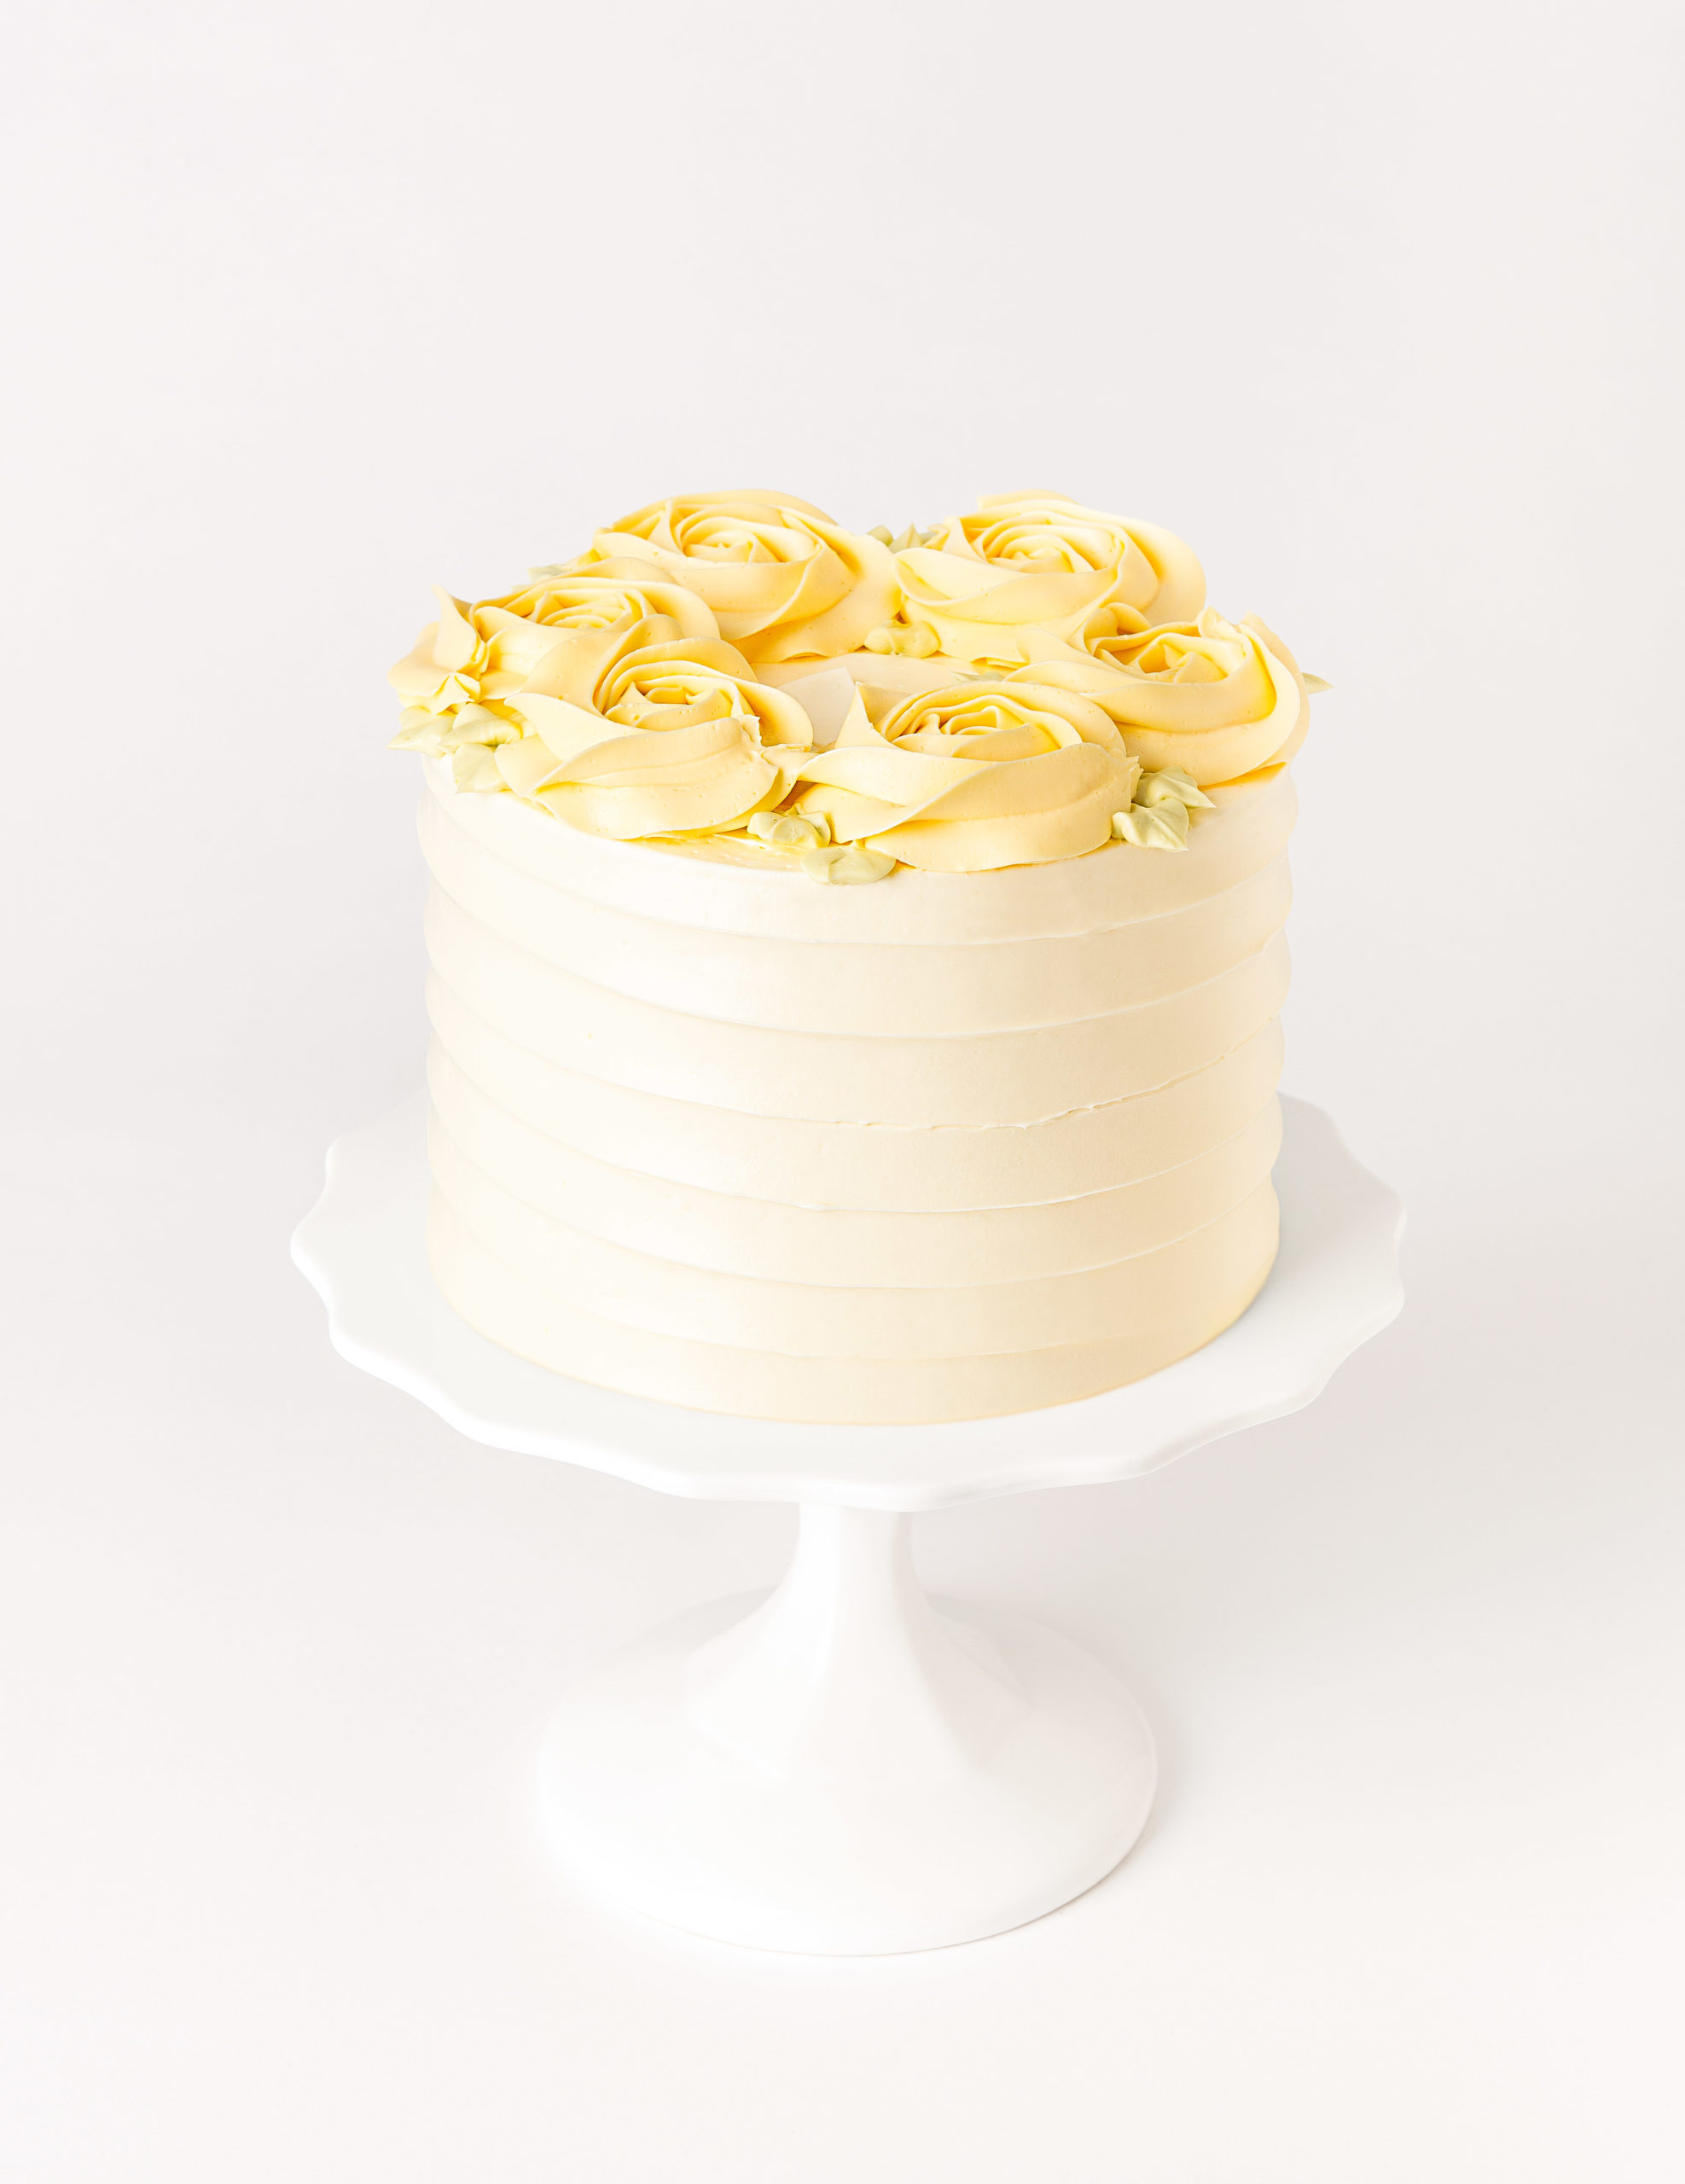 Passionfruit Cake with White Chocolate Buttercream - Chenée Today